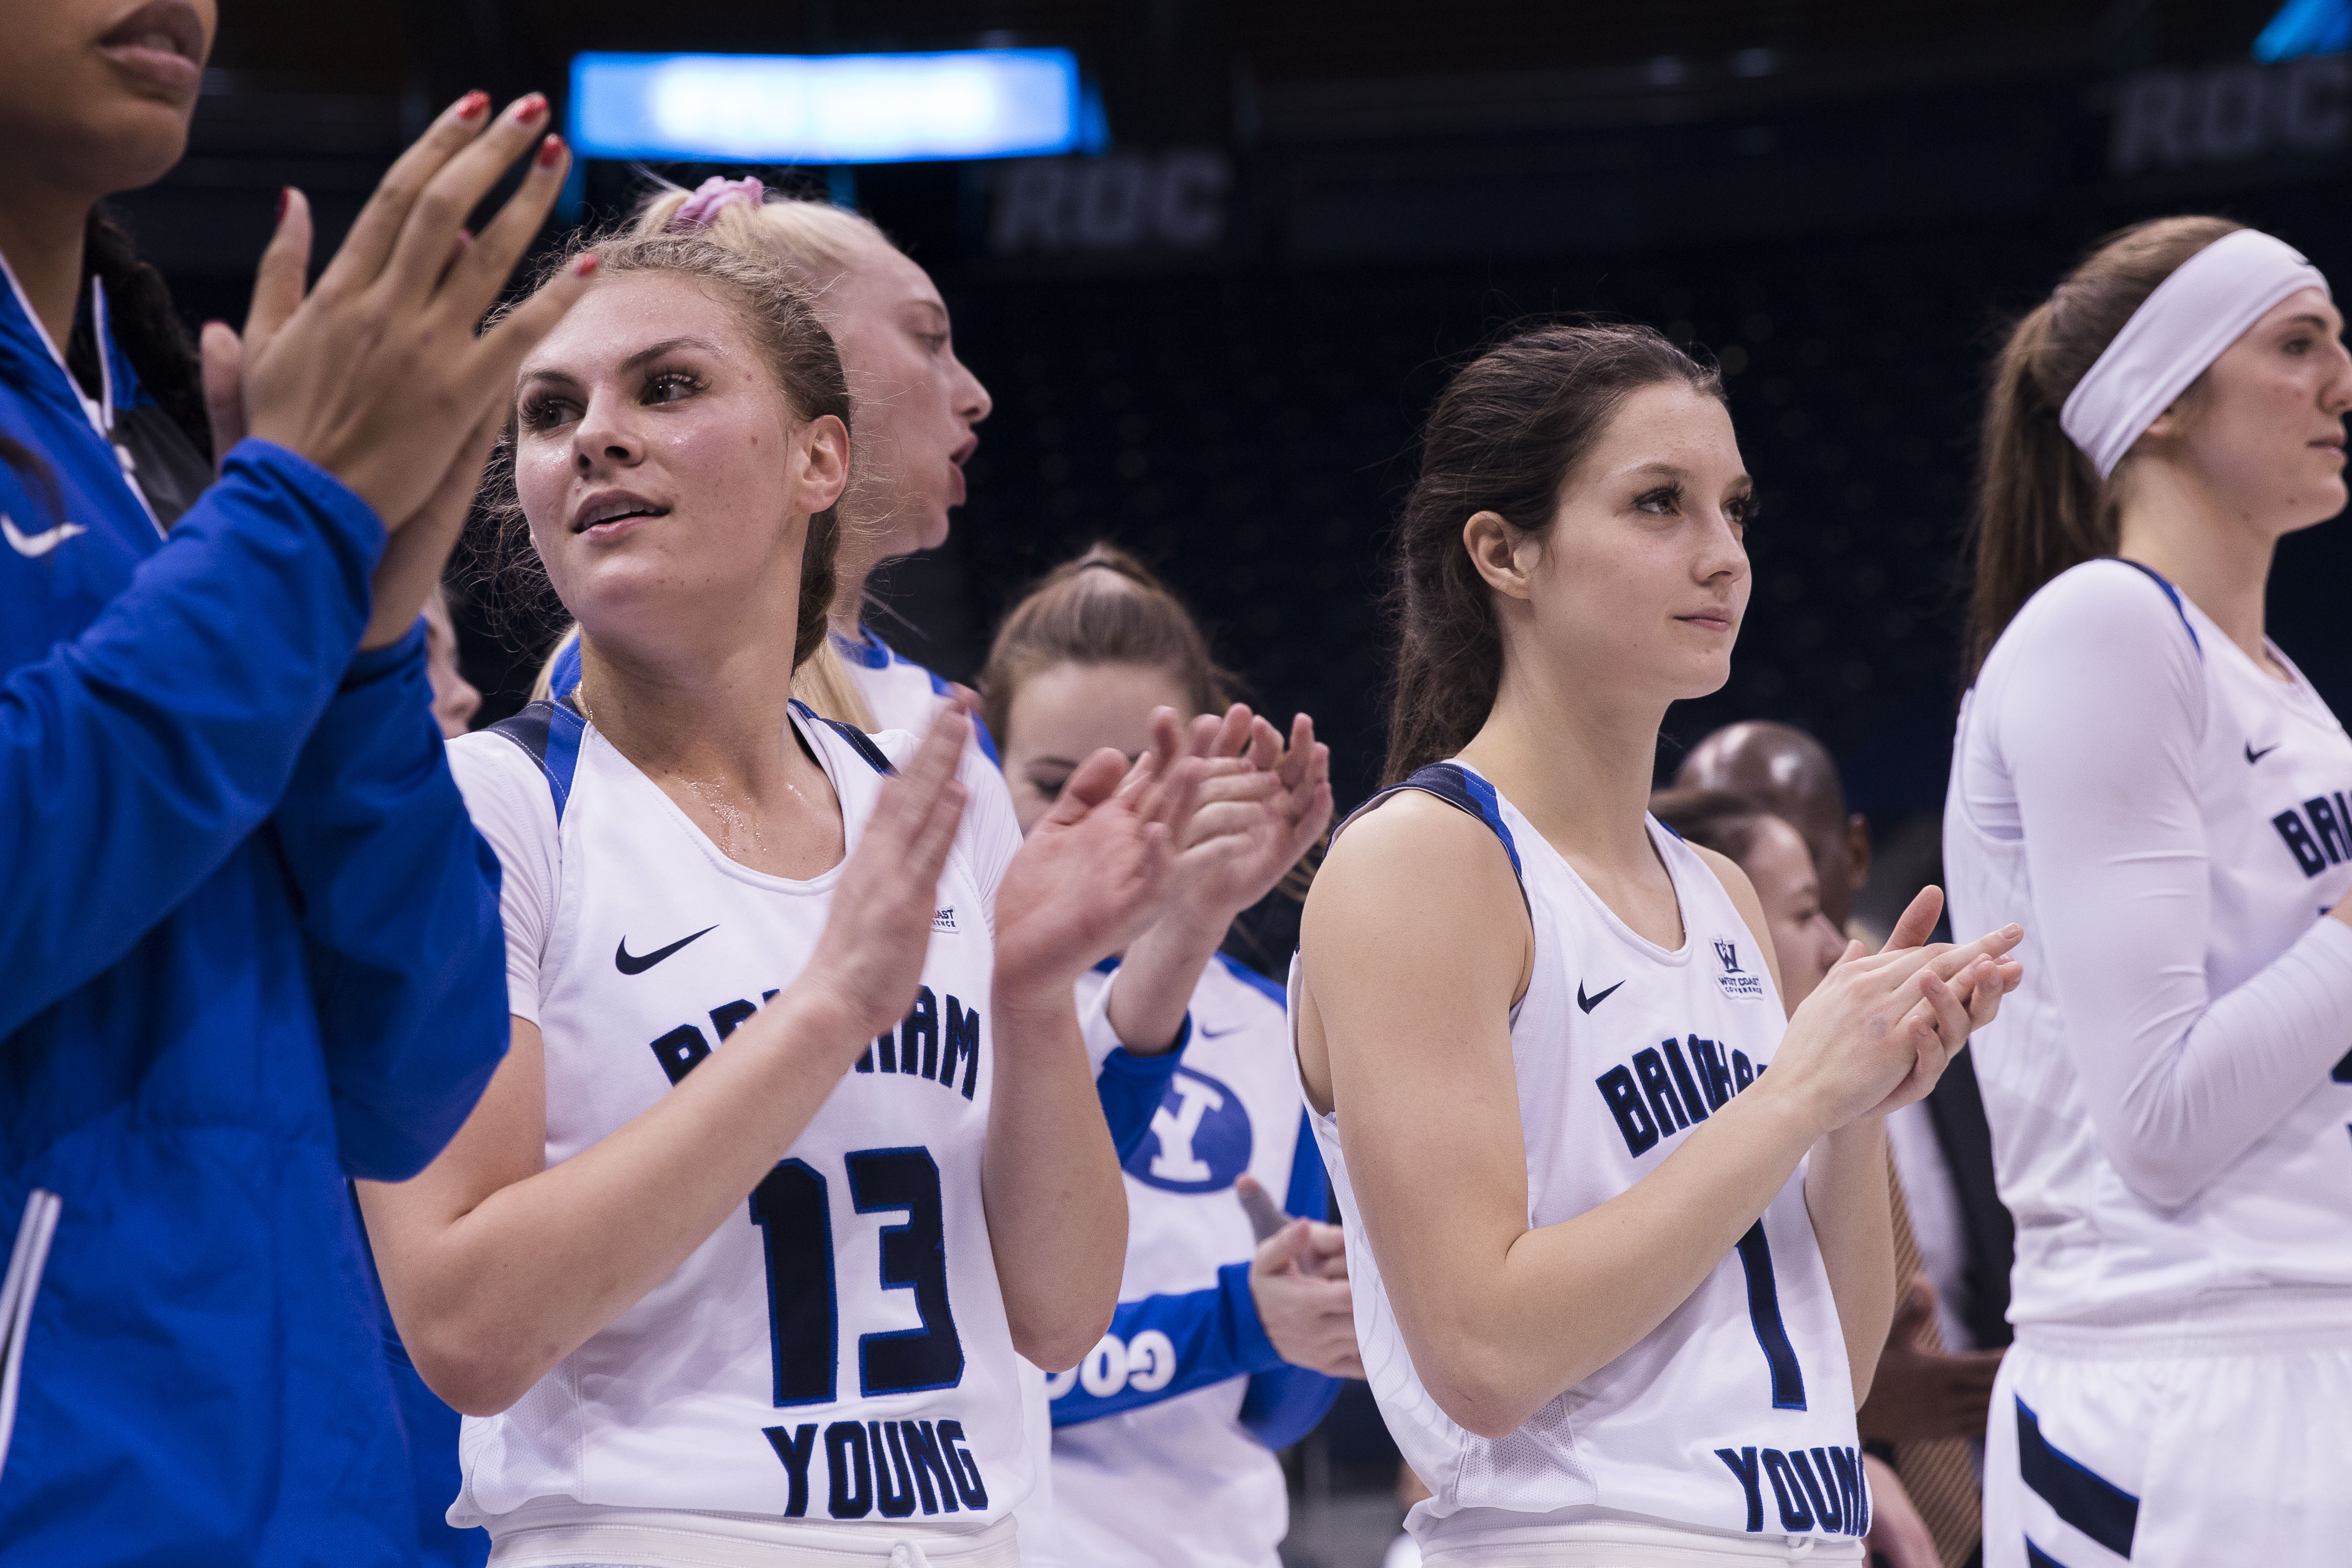 Three BYU women's basketball players receive WCC honors